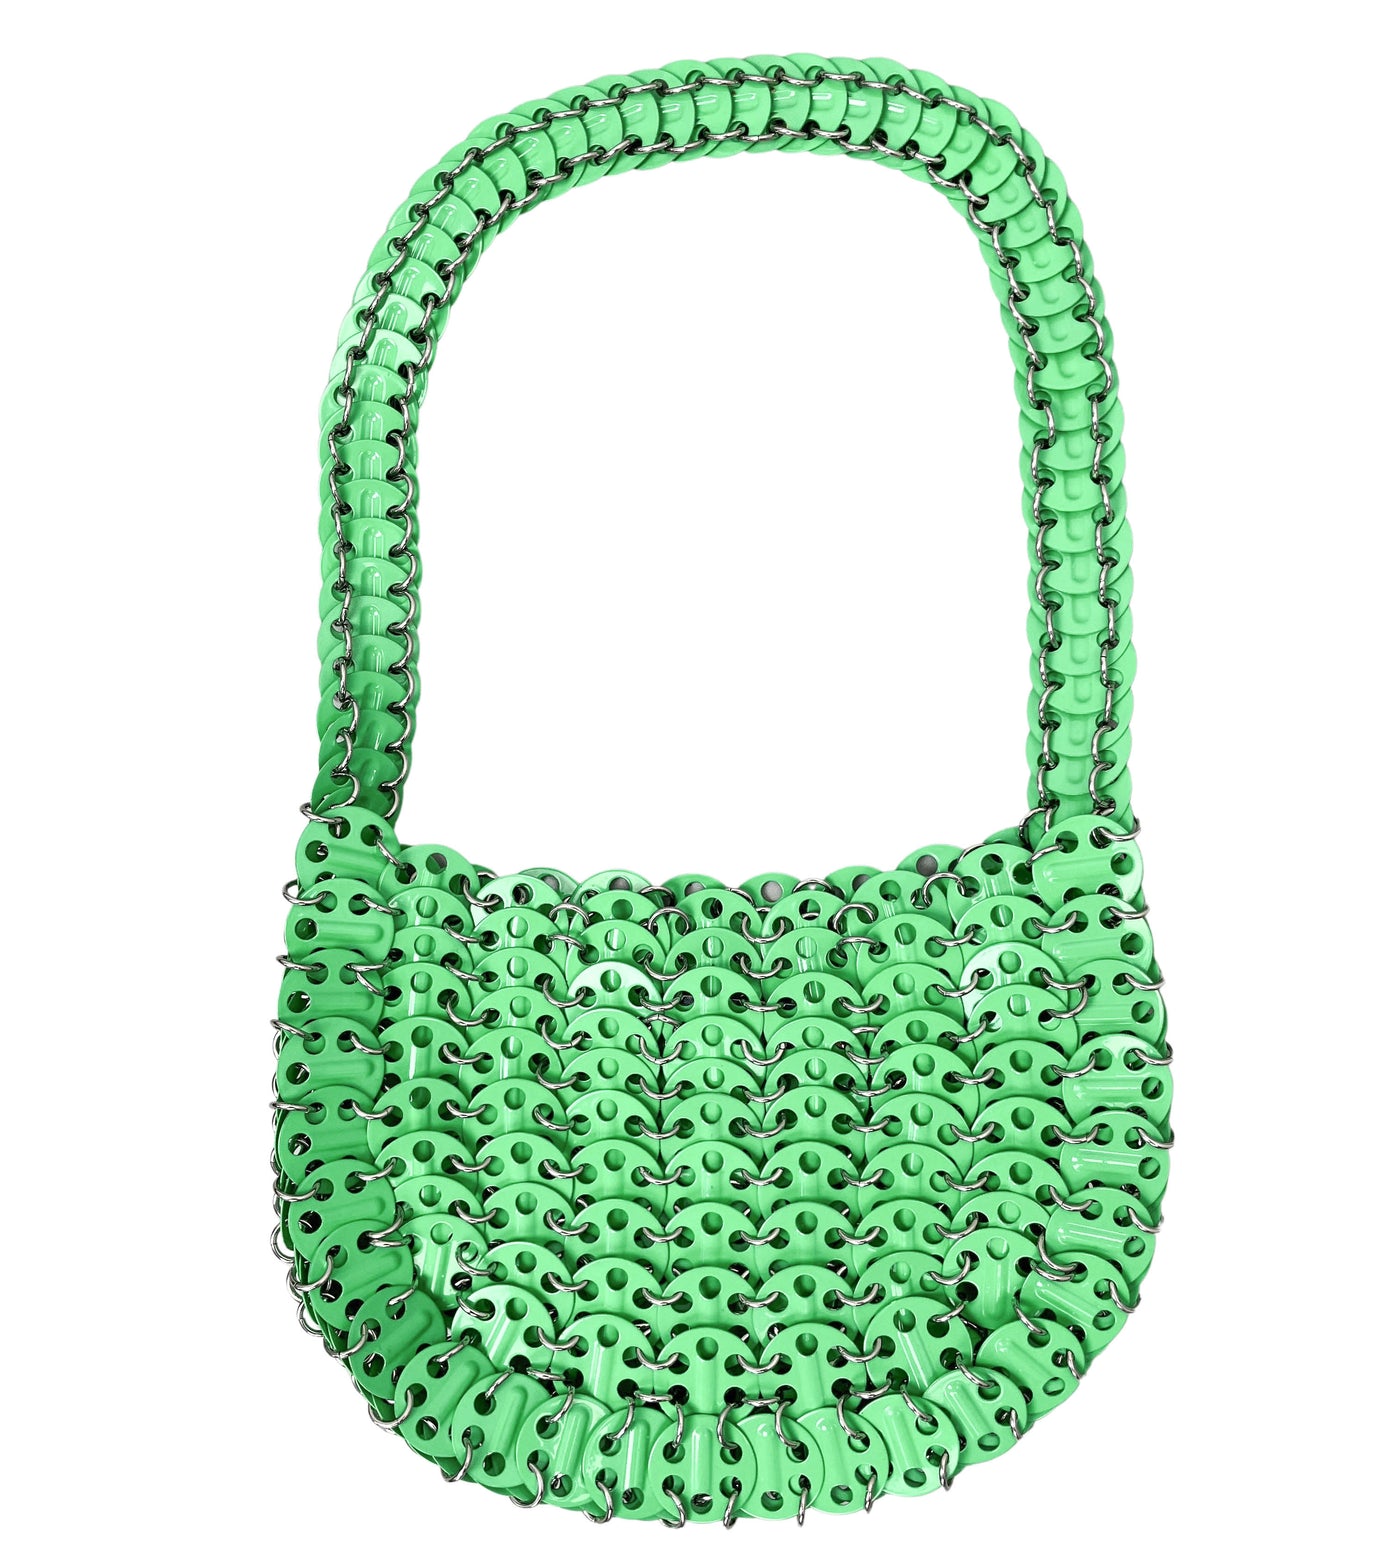 Paco Rabanne Mesh Disc 1969 Moon Bag in Bright Green - Discounts on Paco Rabanne at UAL